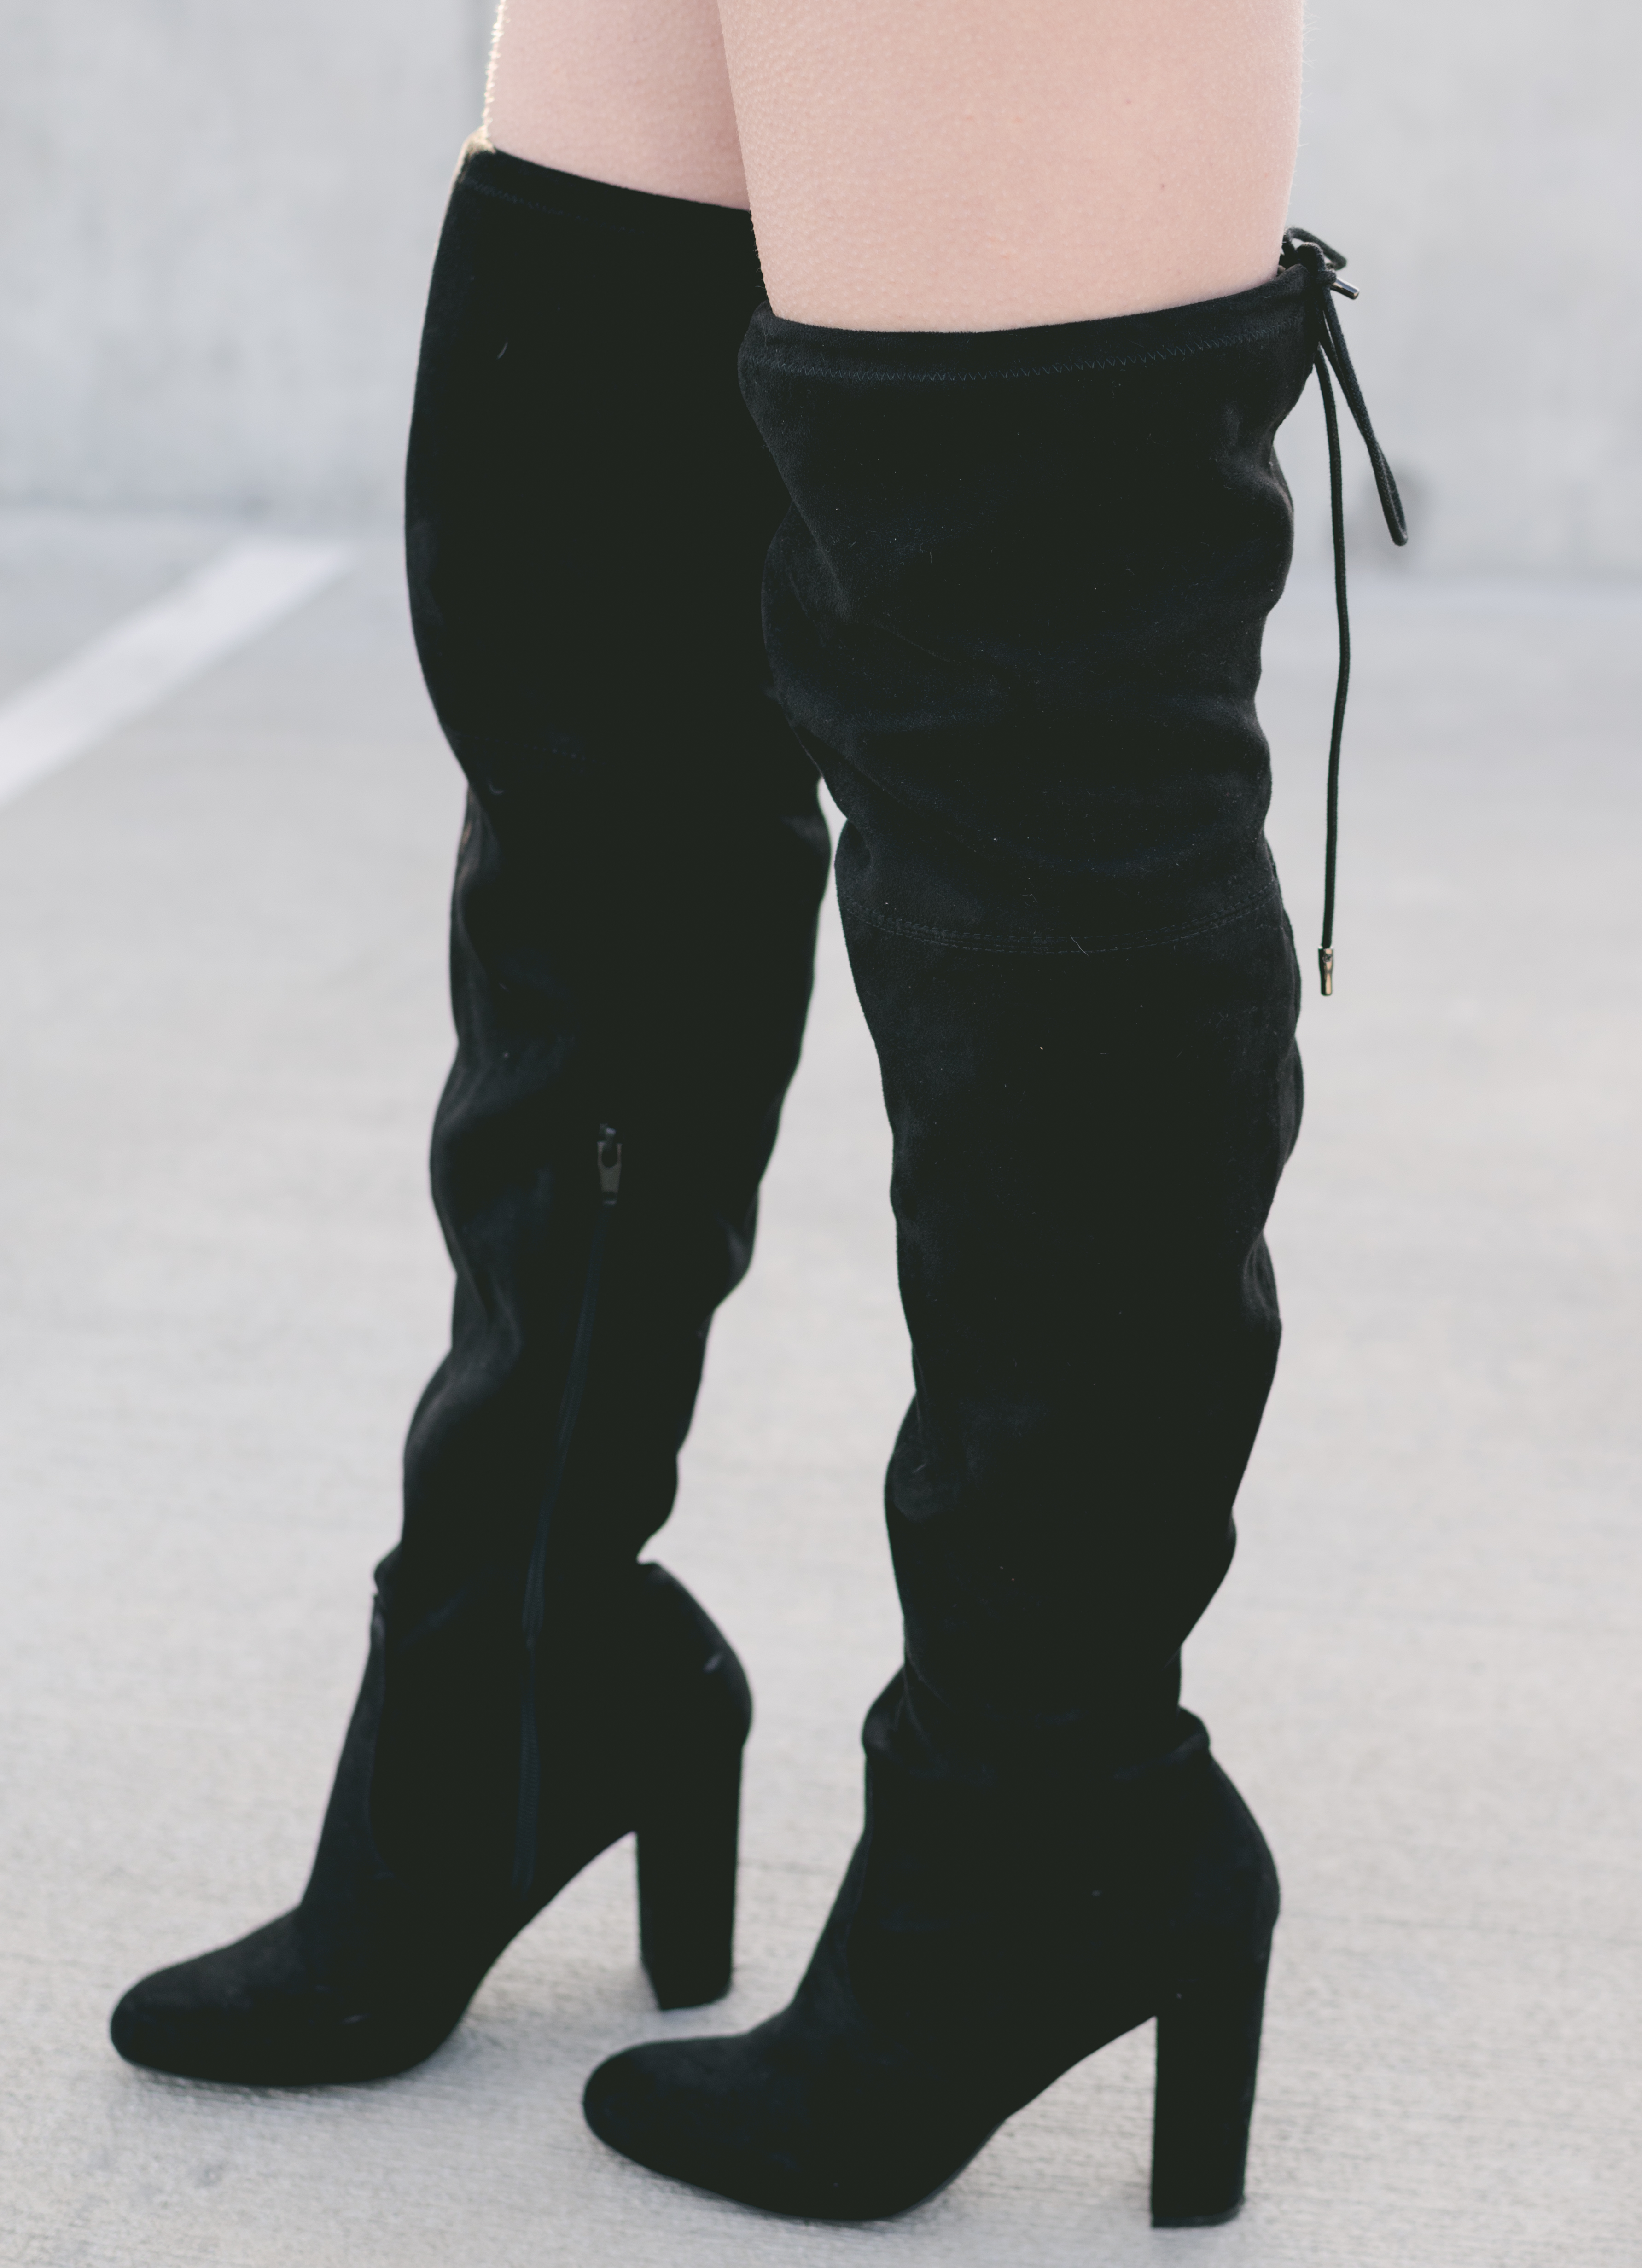 Black knee high boots perfect for new years